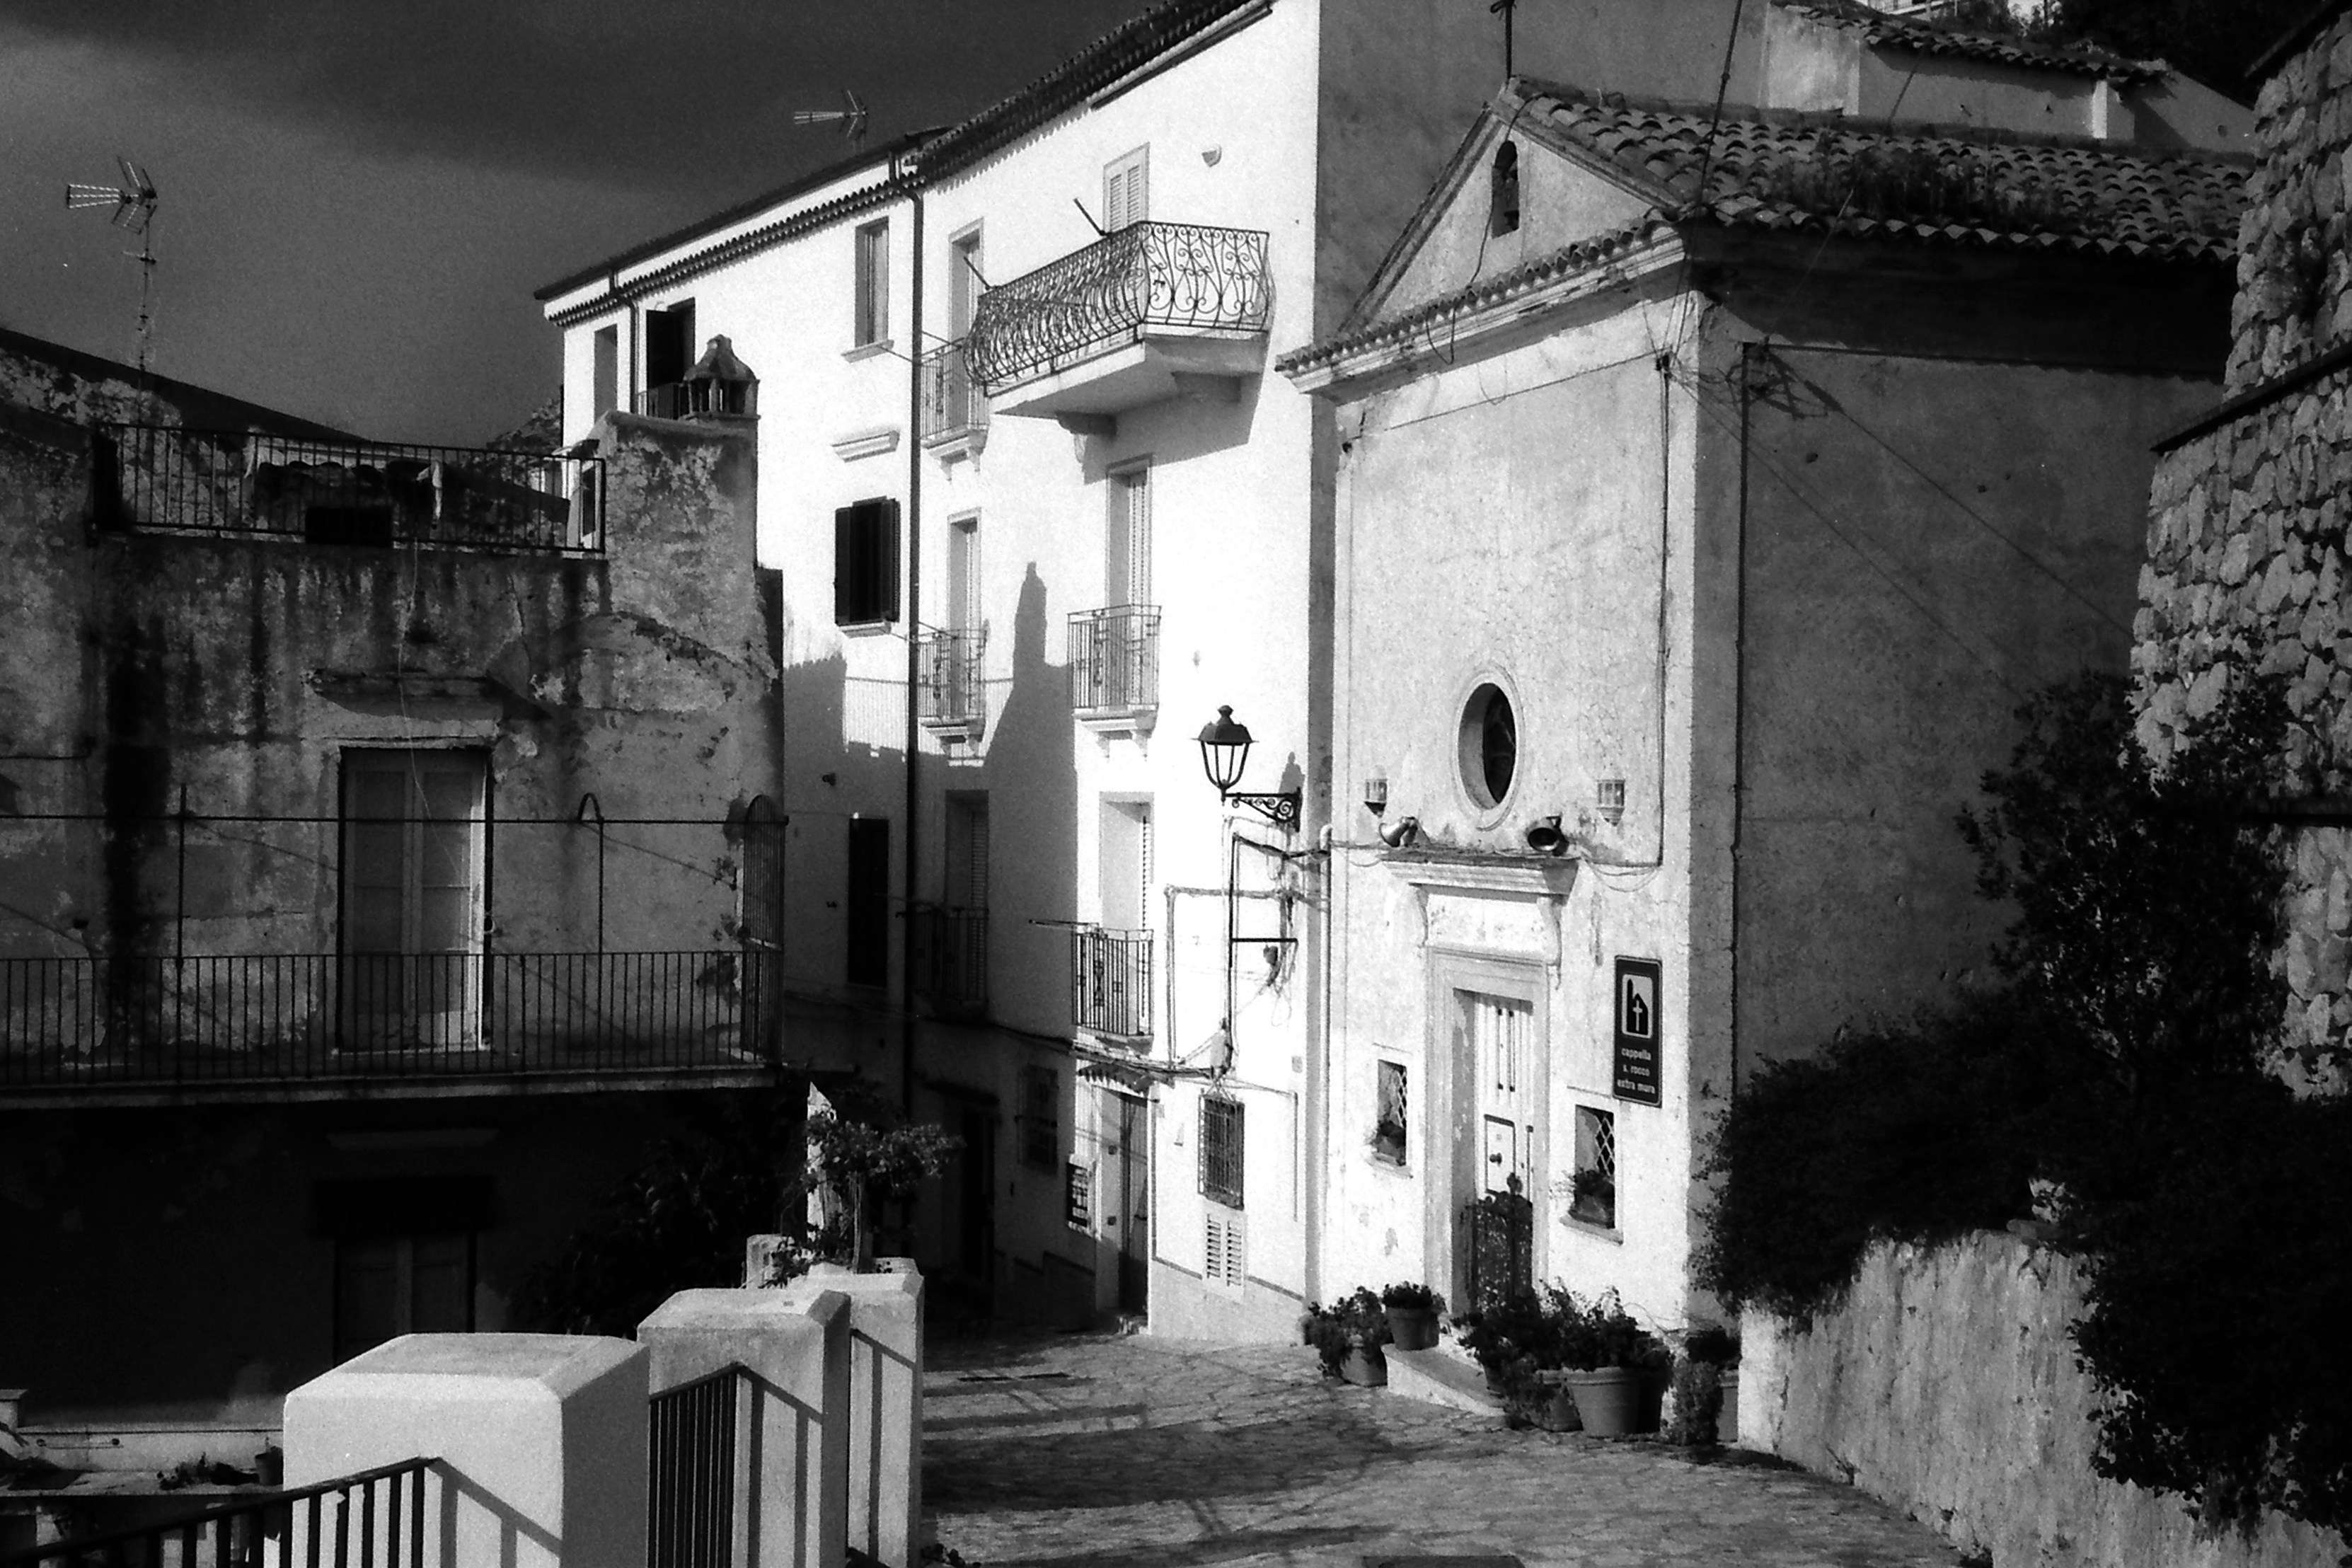 One of the narrow streets of the old beach town of Sperlonga, Lazio, Italy. Olympus 35 RC on Fomapan 200 B&W film.